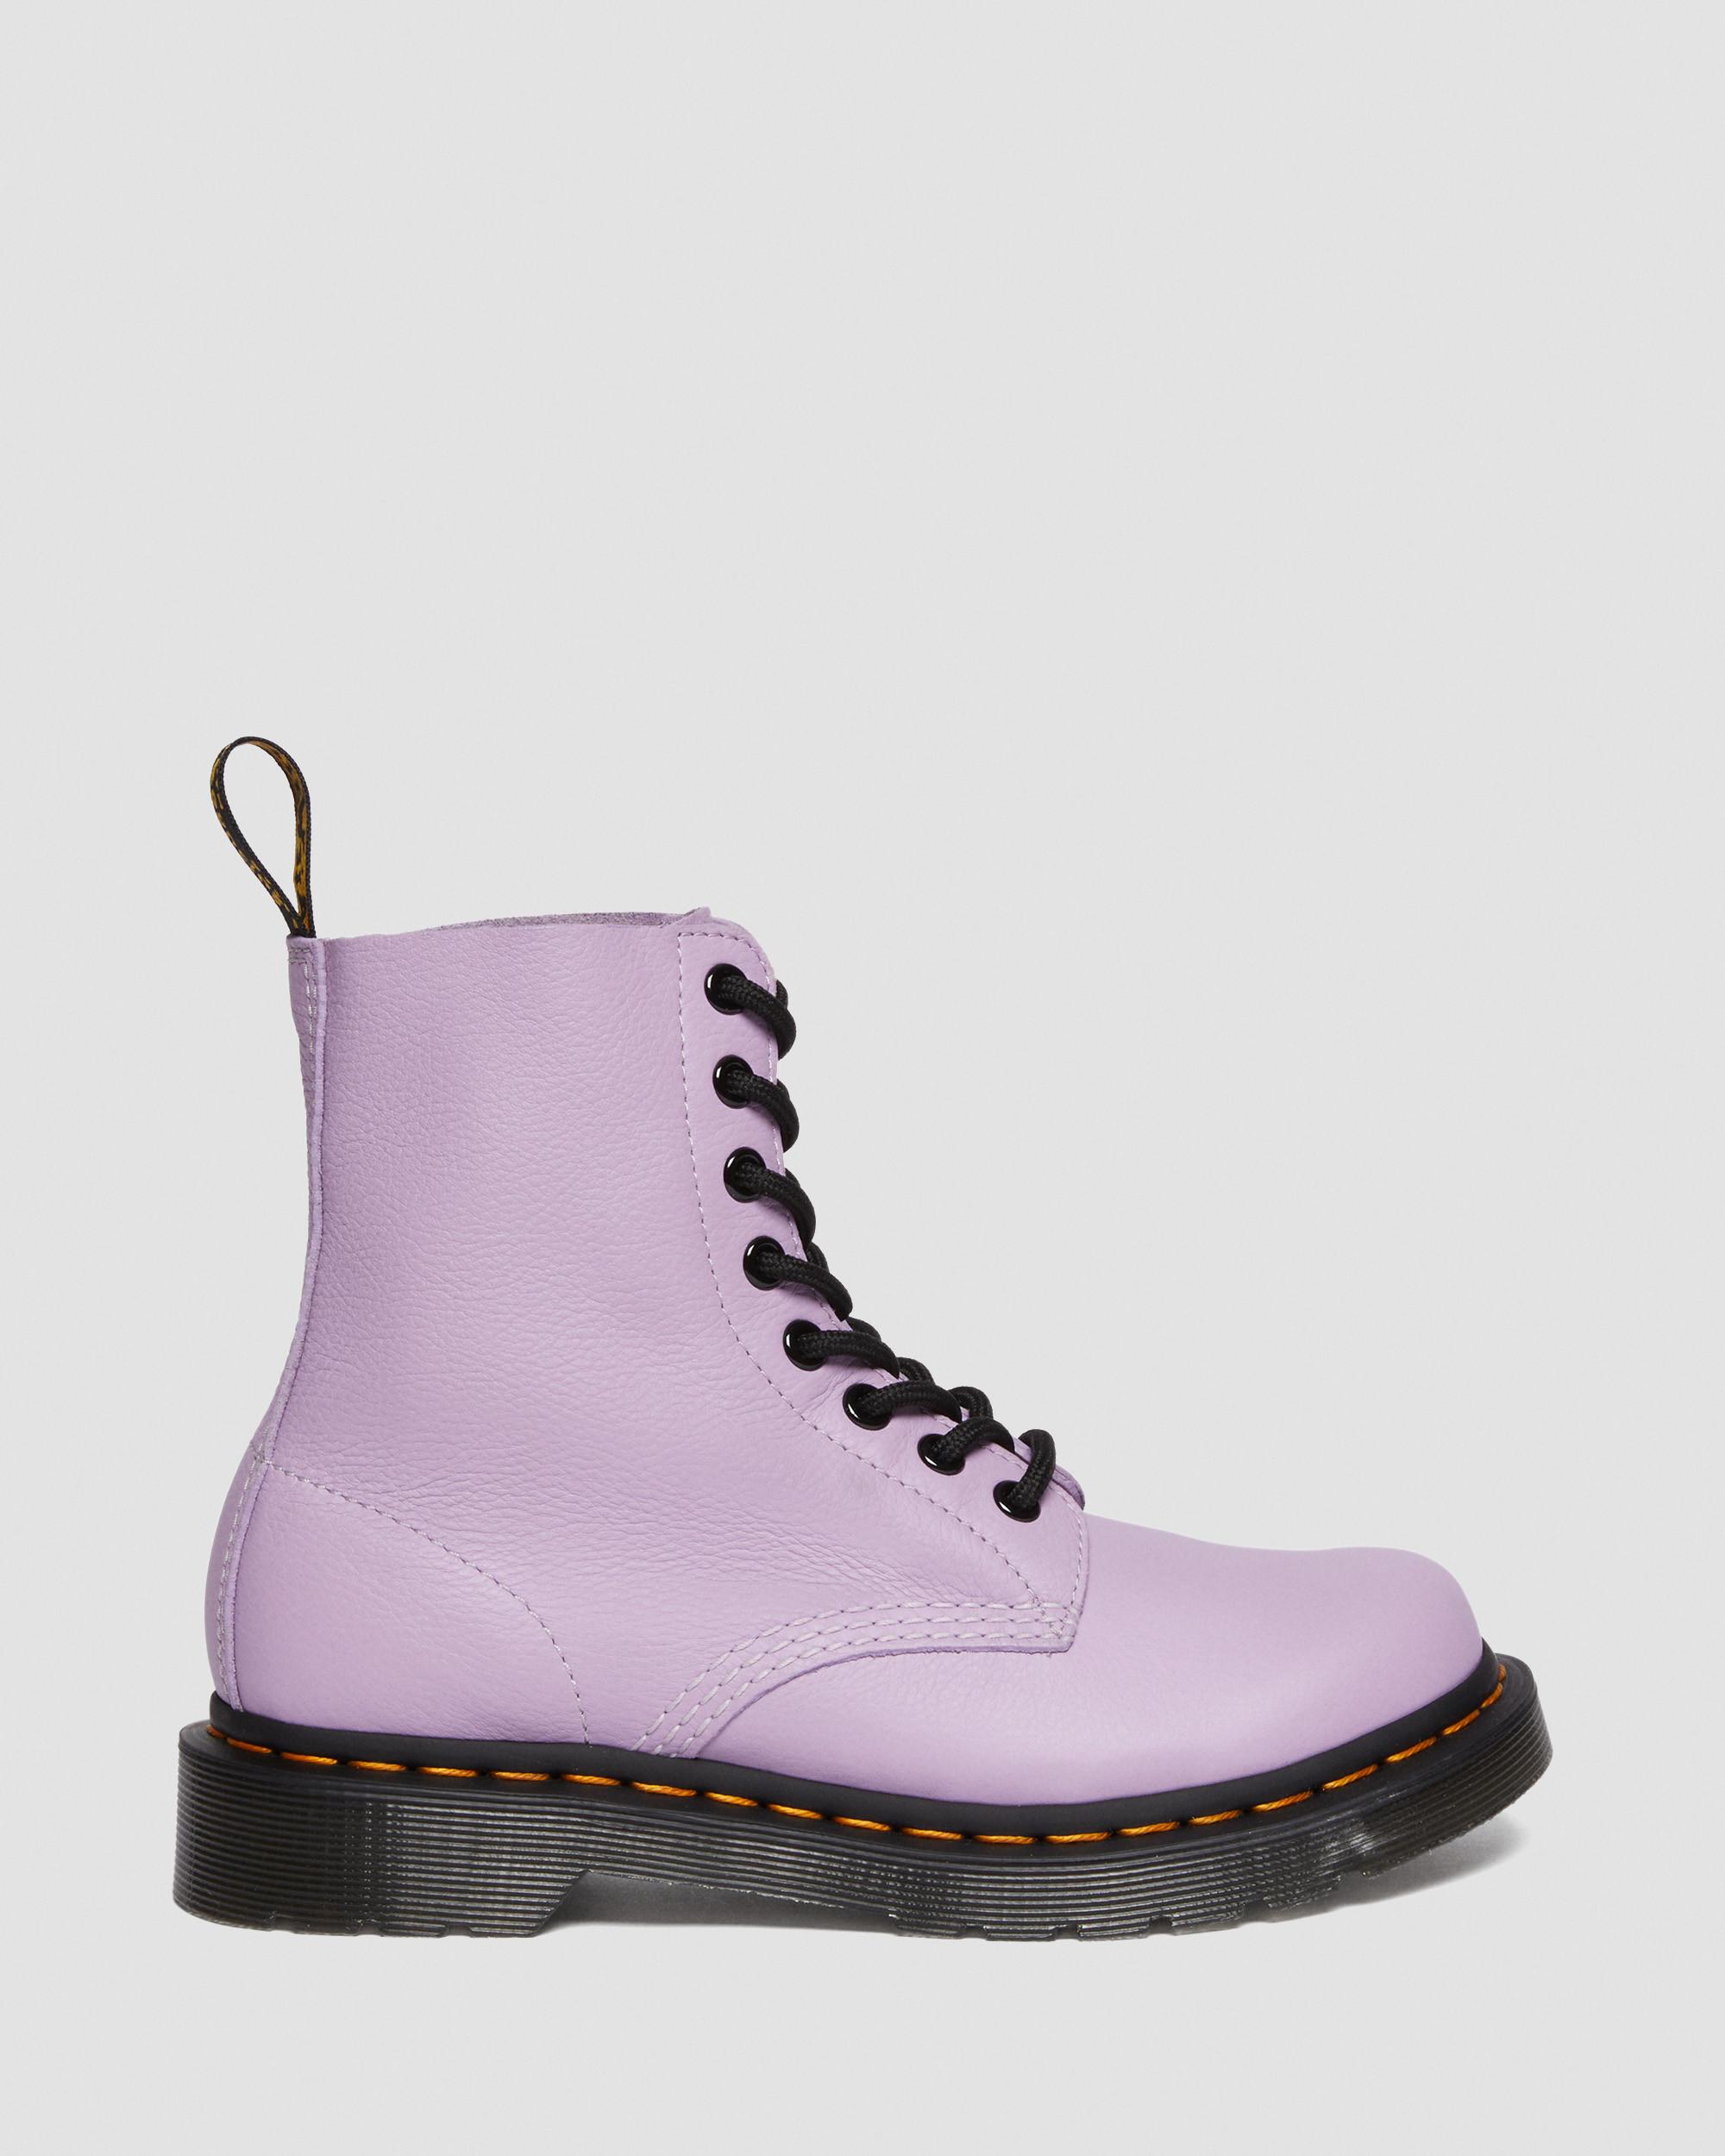 1460 Boots Black Eyelet Up Martens in Pascal | Lilac Women\'s Dr. Lace